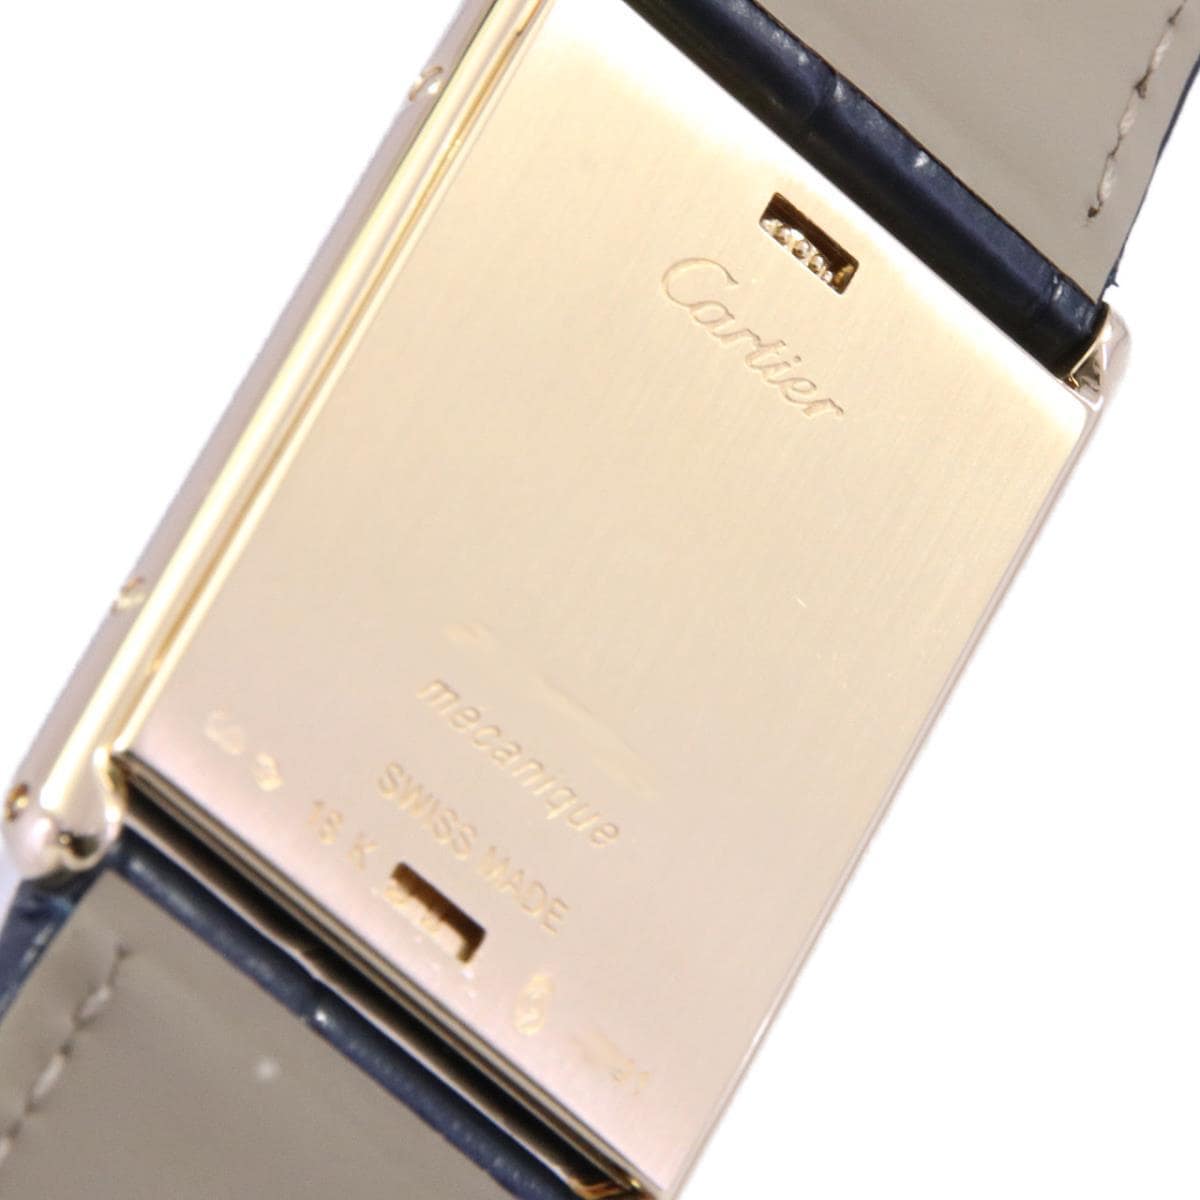 Cartier W1526251 Tank Vasculant LM YG LIMITED手动上弦